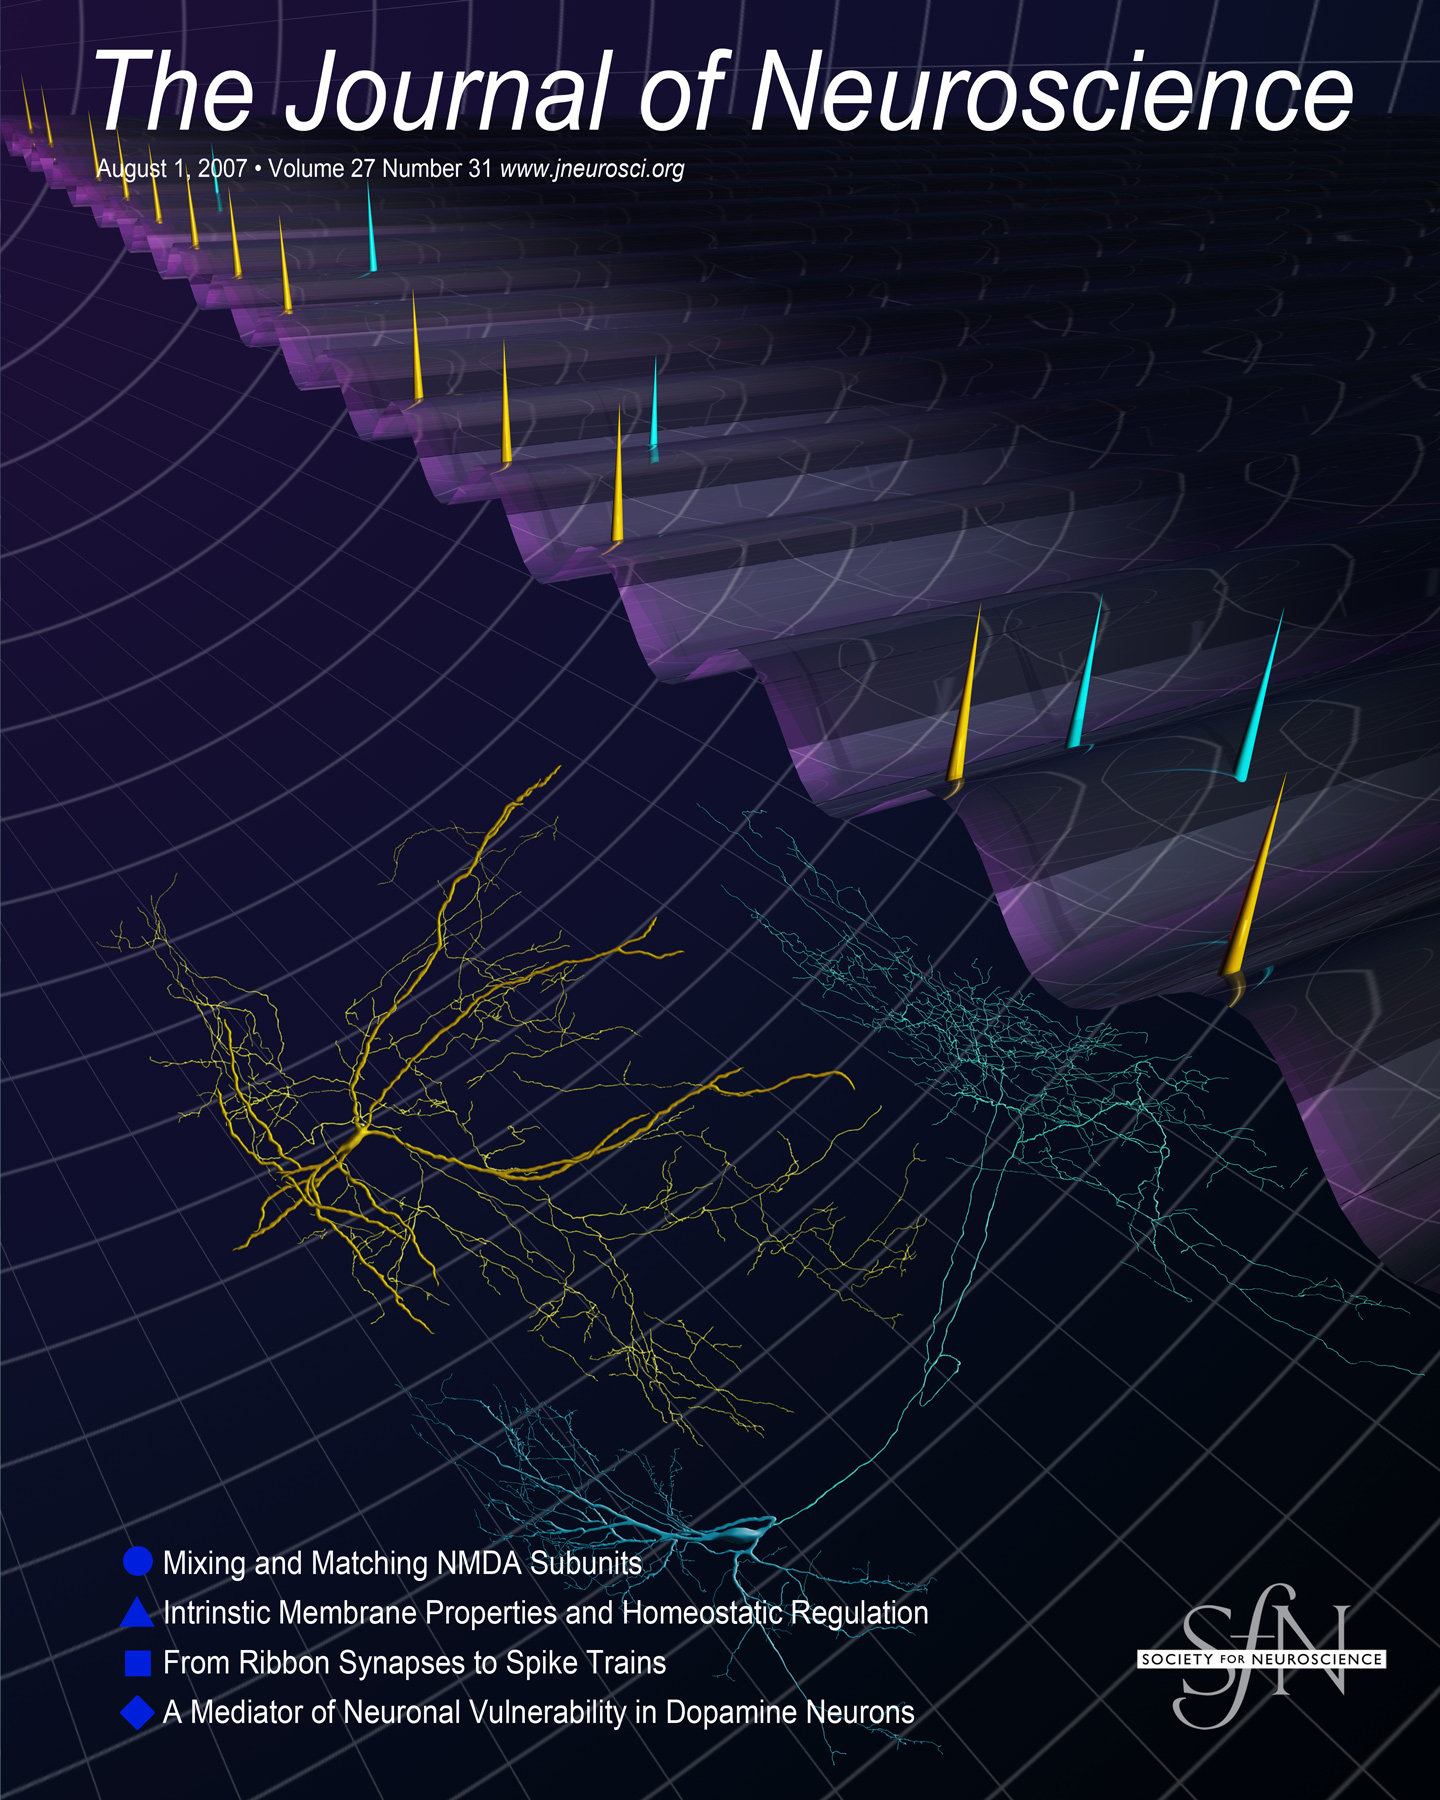 August 1st 2007 cover of Journal of Neuroscience